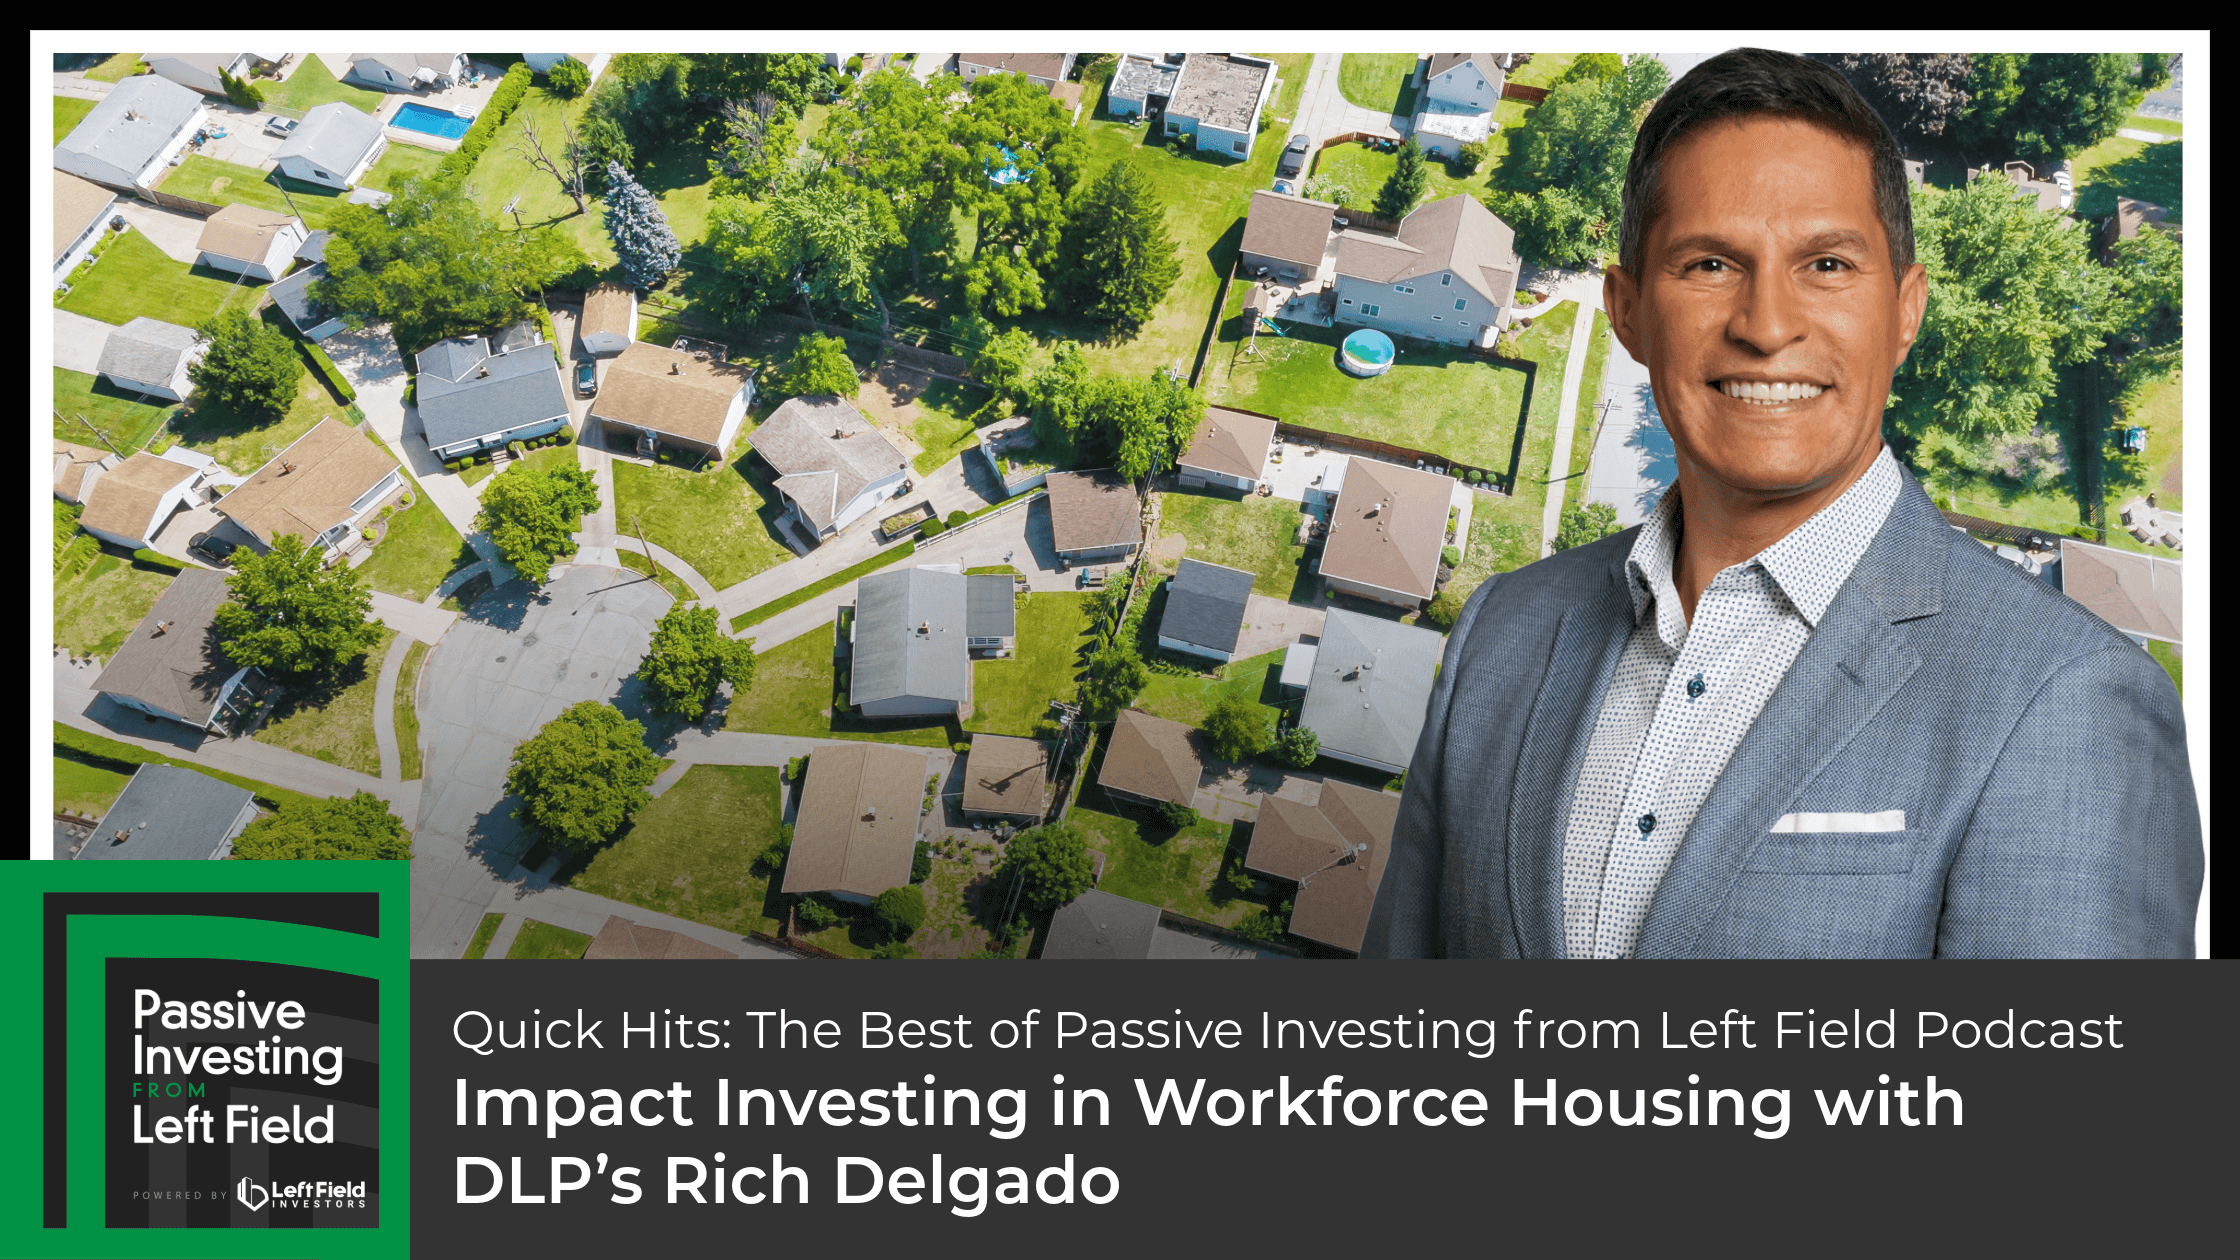 Impact Investing in Workforce Housing with DLP's Rich Delgado